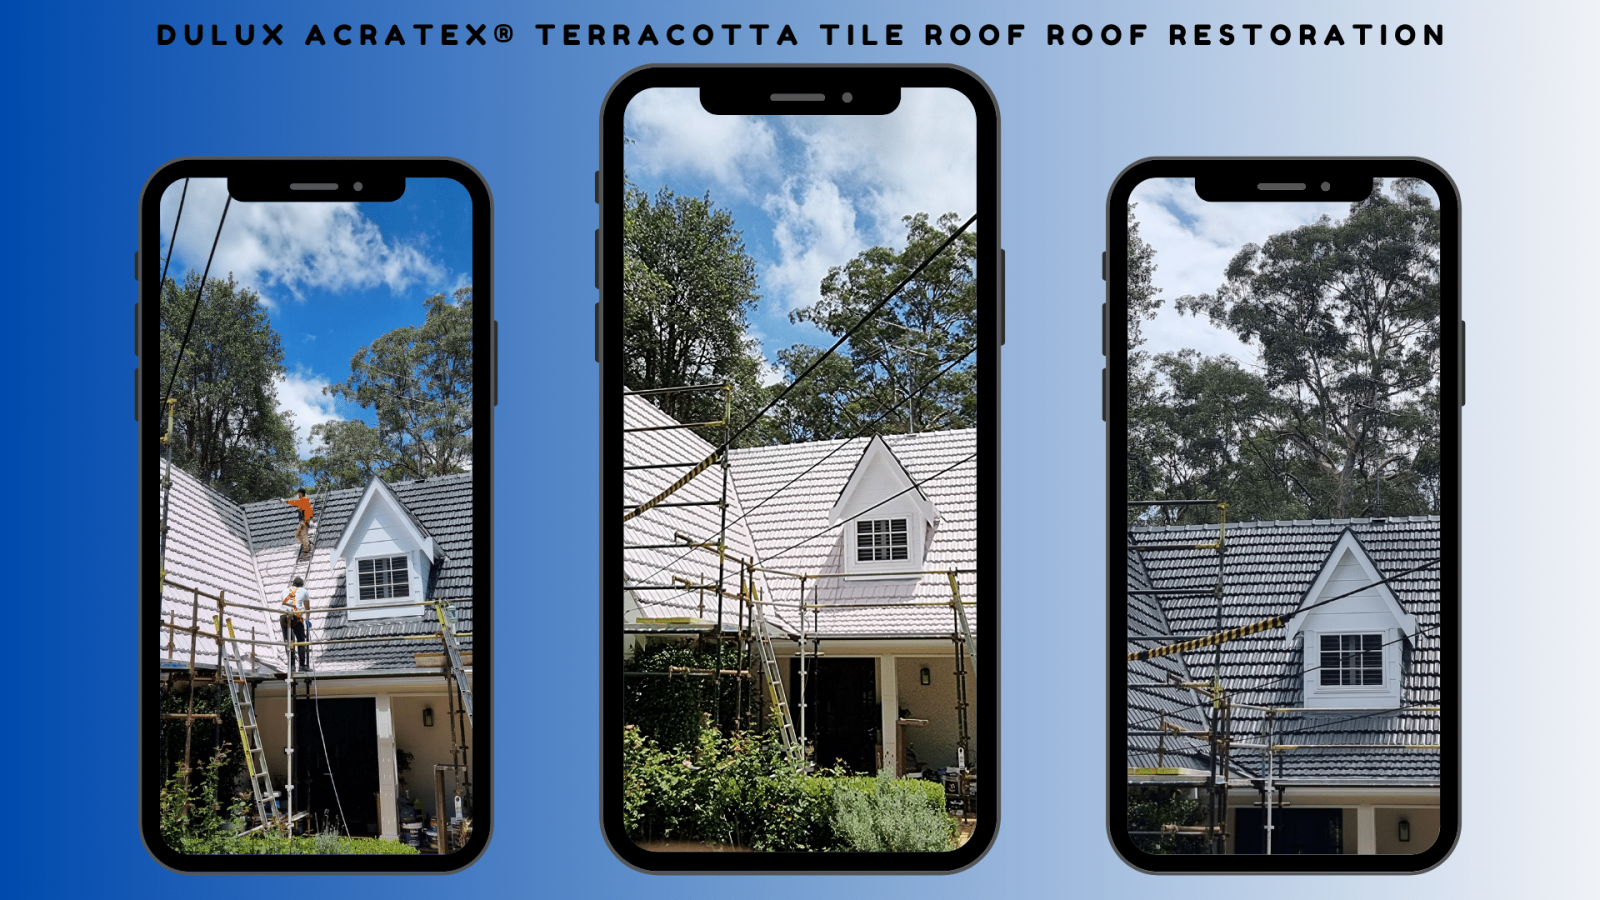 View Photo: Dulux Acratex® Terracotta Tile Roof Roof Restoration System